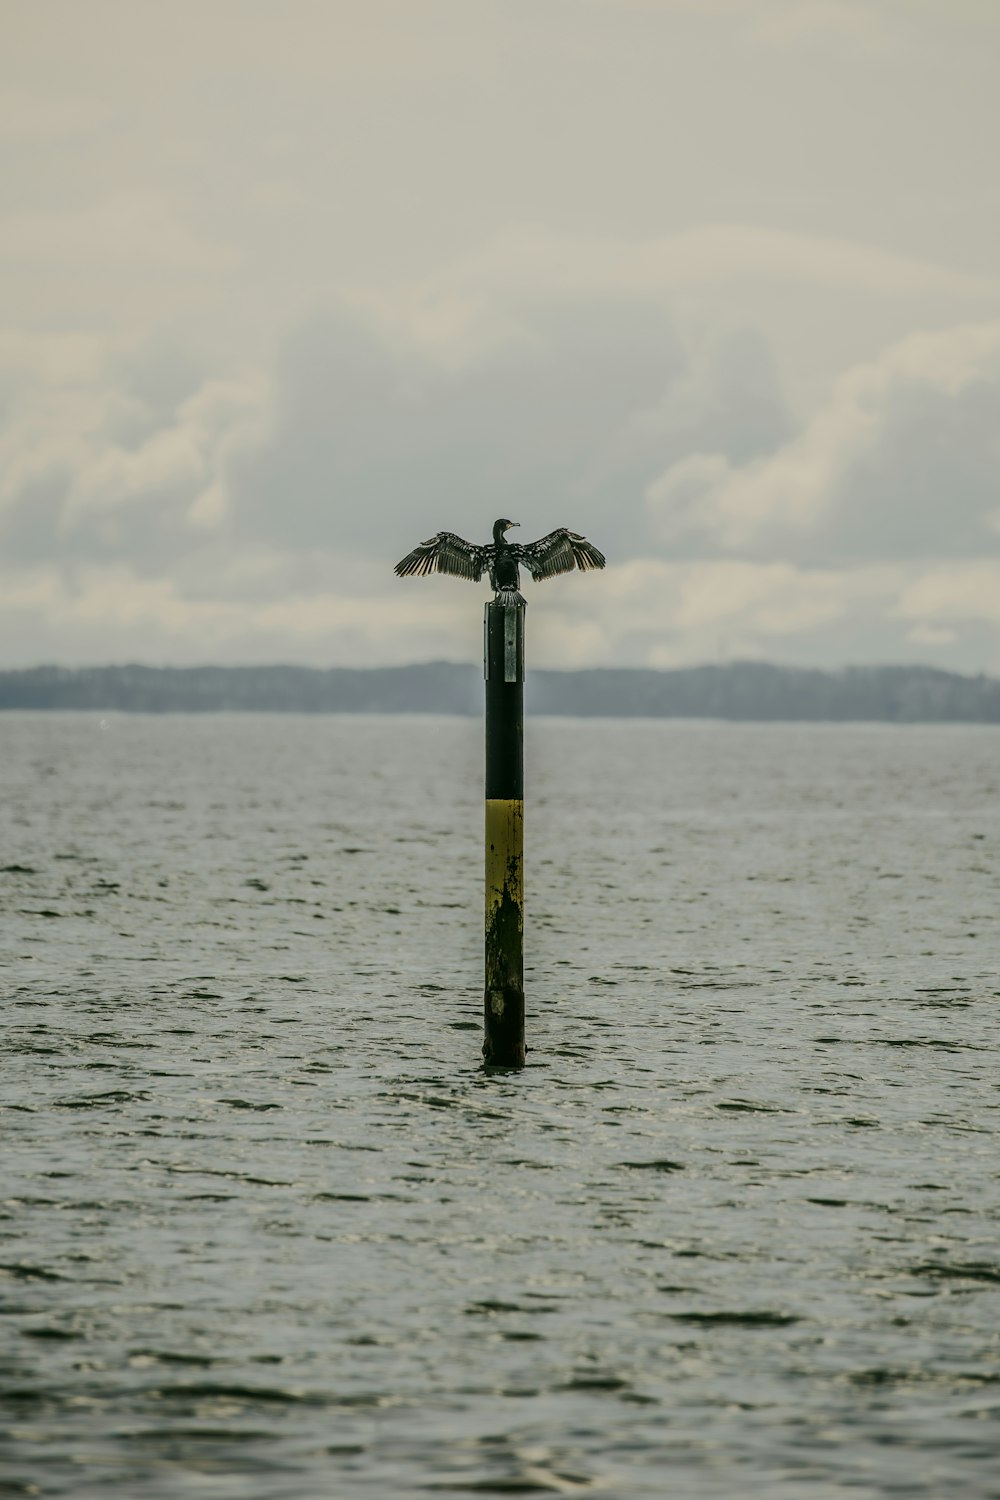 a bird sitting on top of a pole in the middle of a body of water